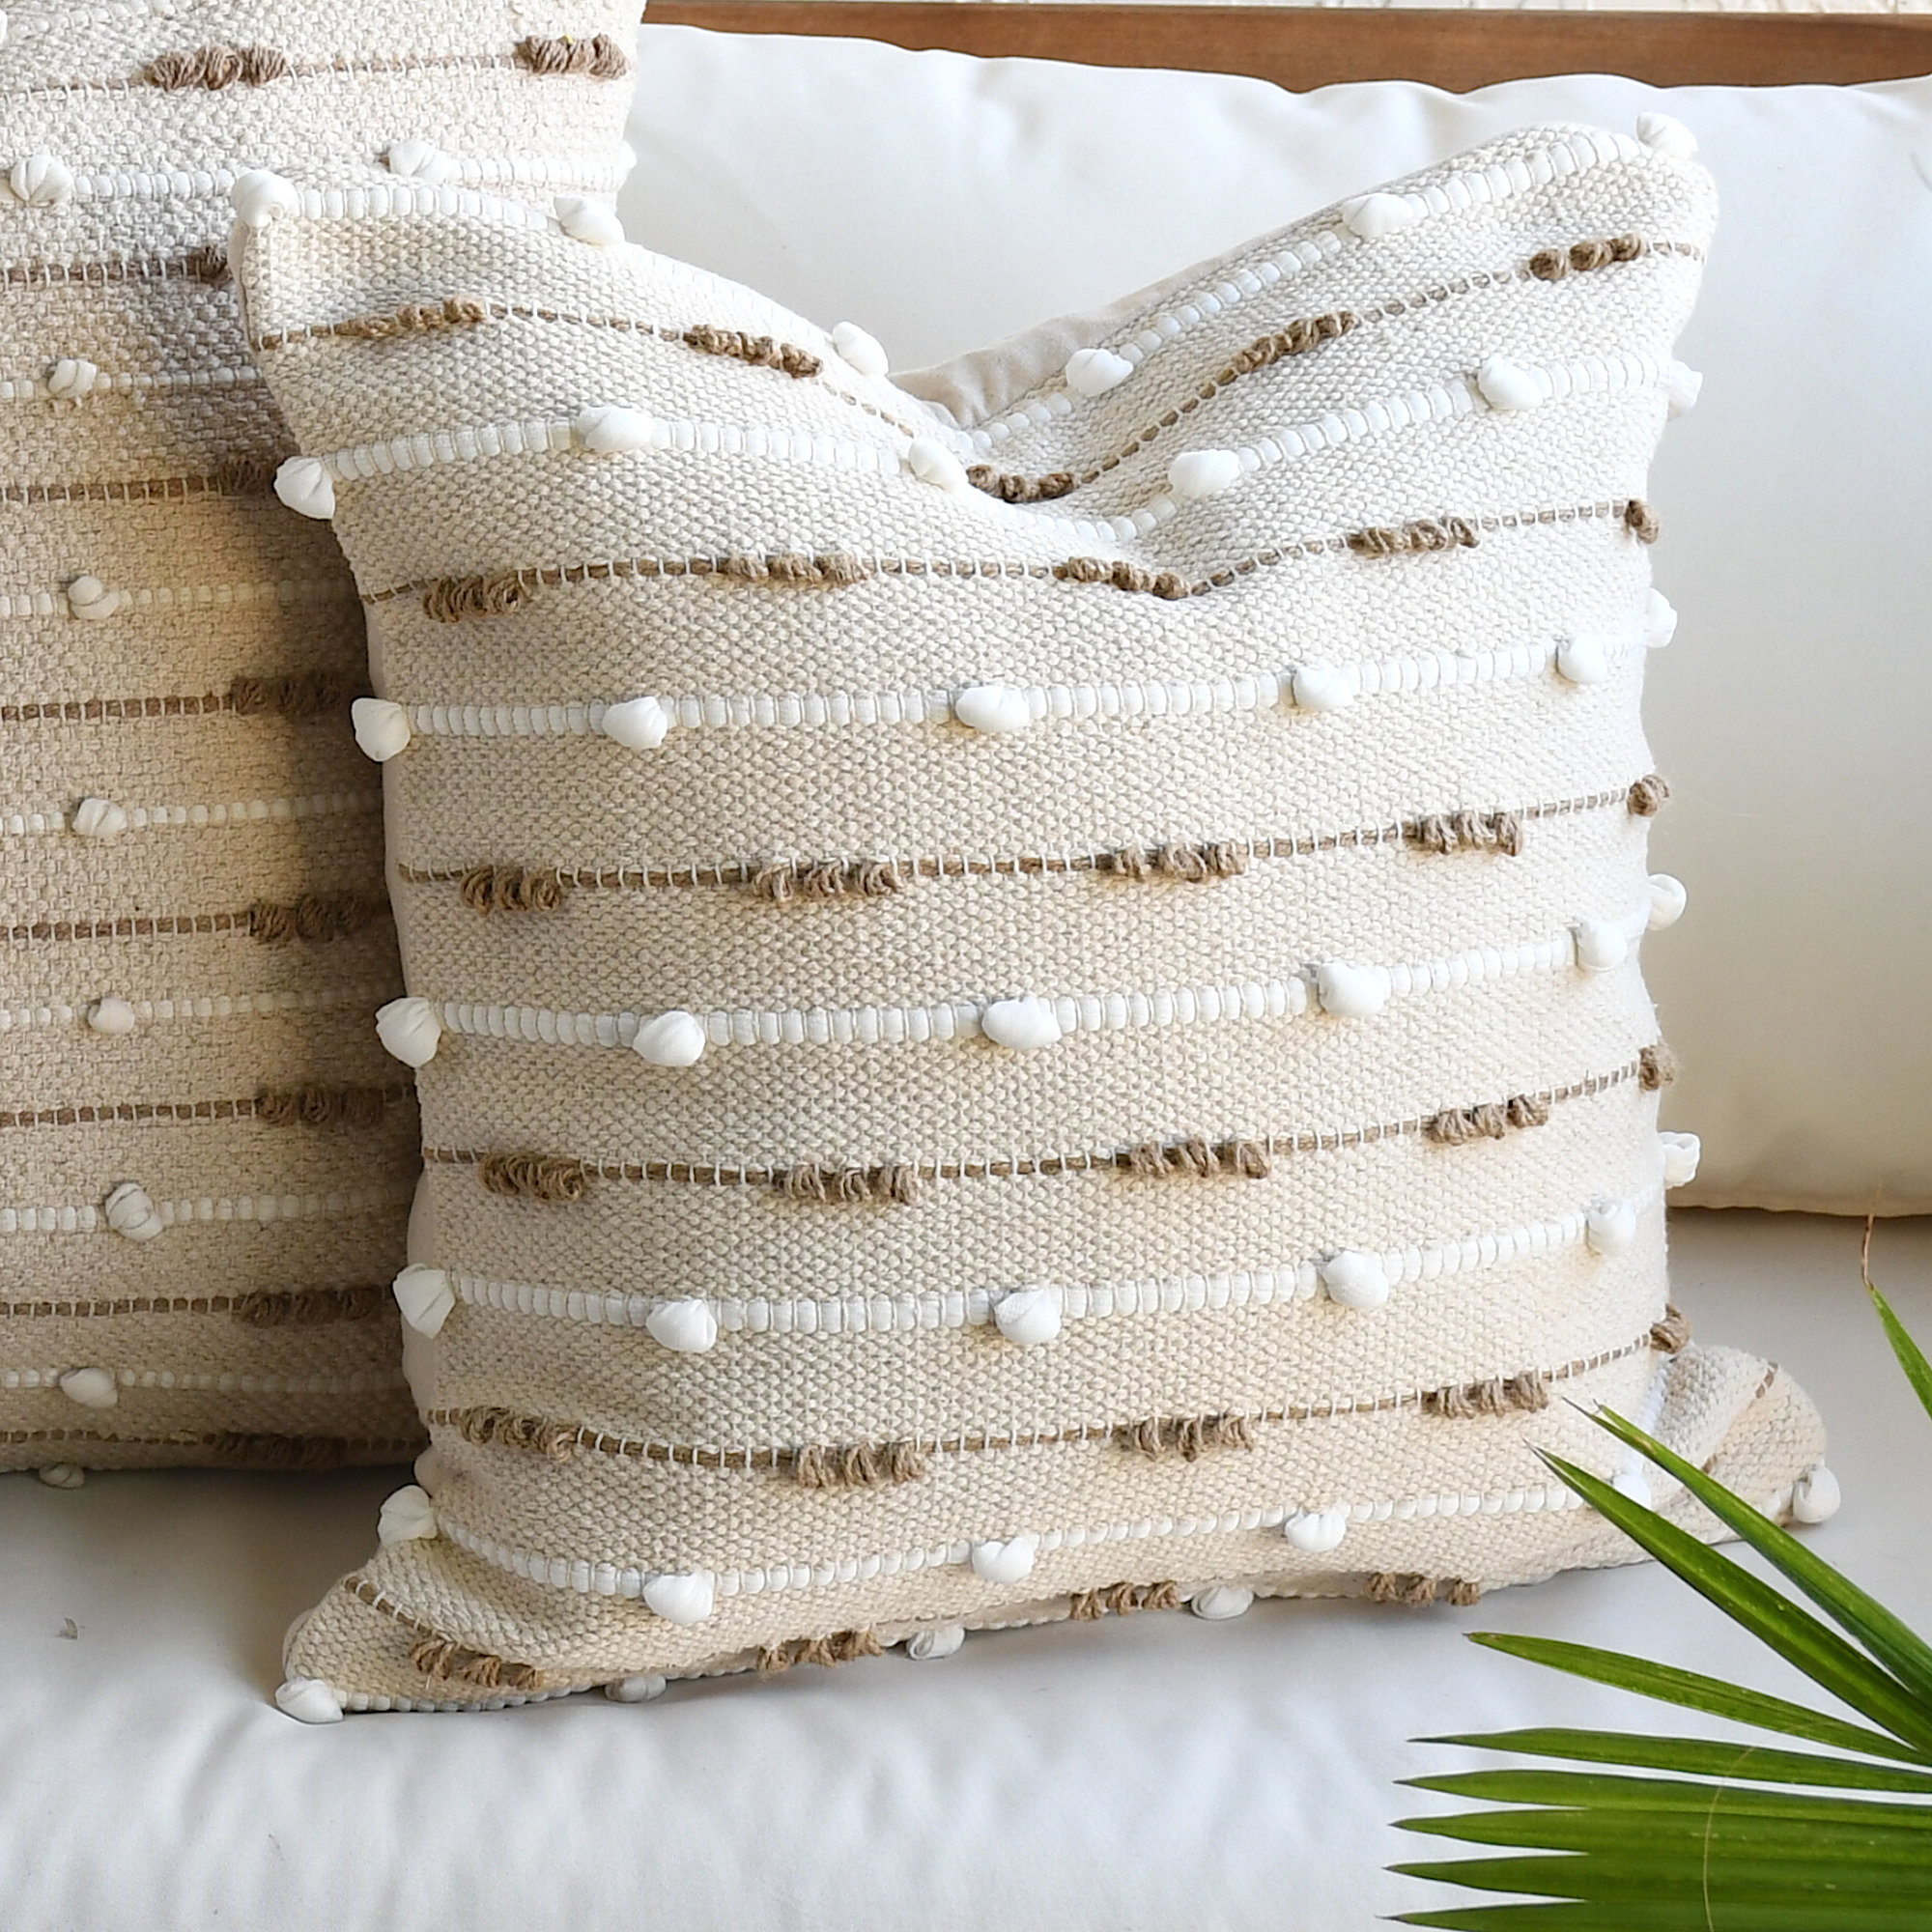 Decorative Boho Throw Pillow Covers 18 × 18 Set of 3 - Neutral Linen Cotton  Throw Pillows with Handmade Fringes & Tassels, Cream Beige Tan Accent